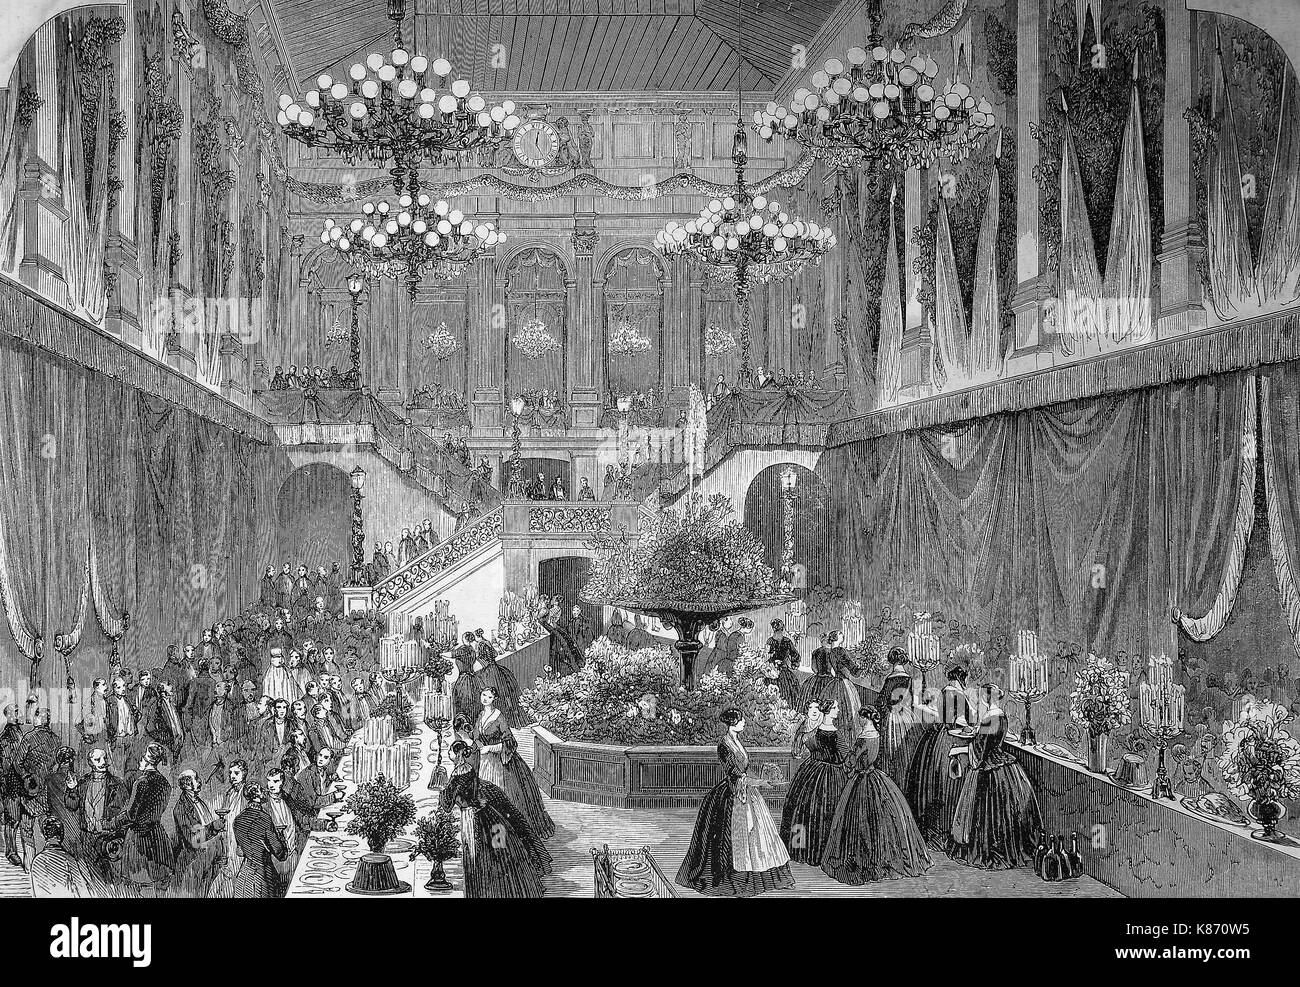 a celebration in the Hotel du Louvre, Paris, France for the prince Napoleon, Digital improved reproduction of an original woodprint from the 19th century Stock Photo